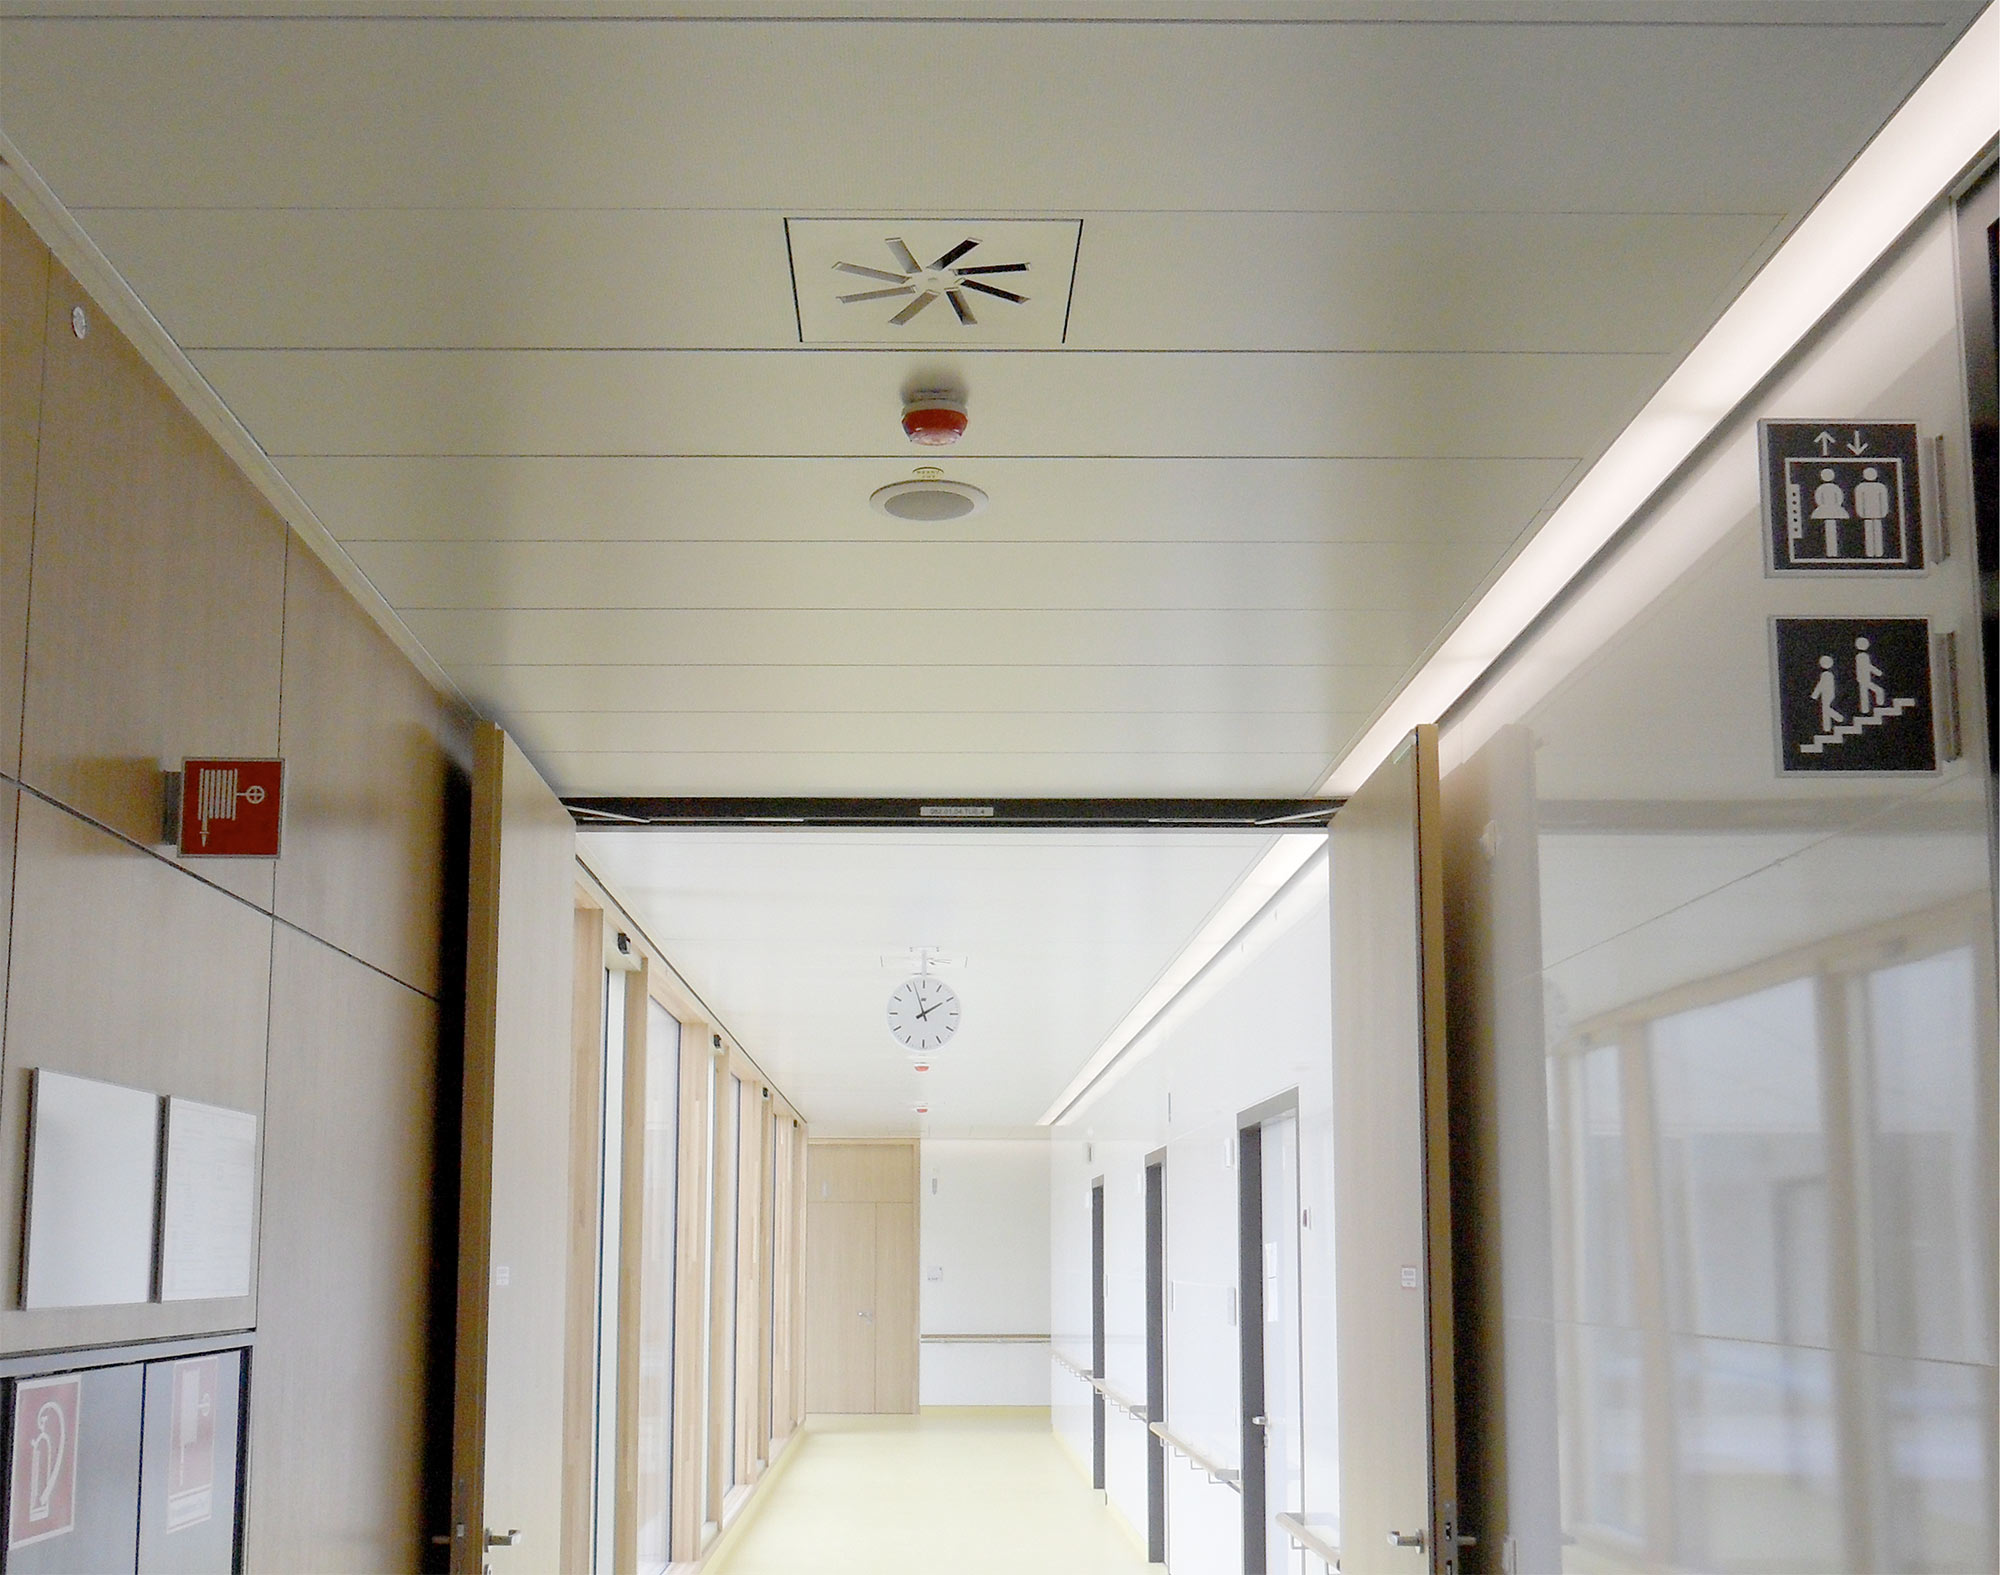 F-30 Fire protection ceilings